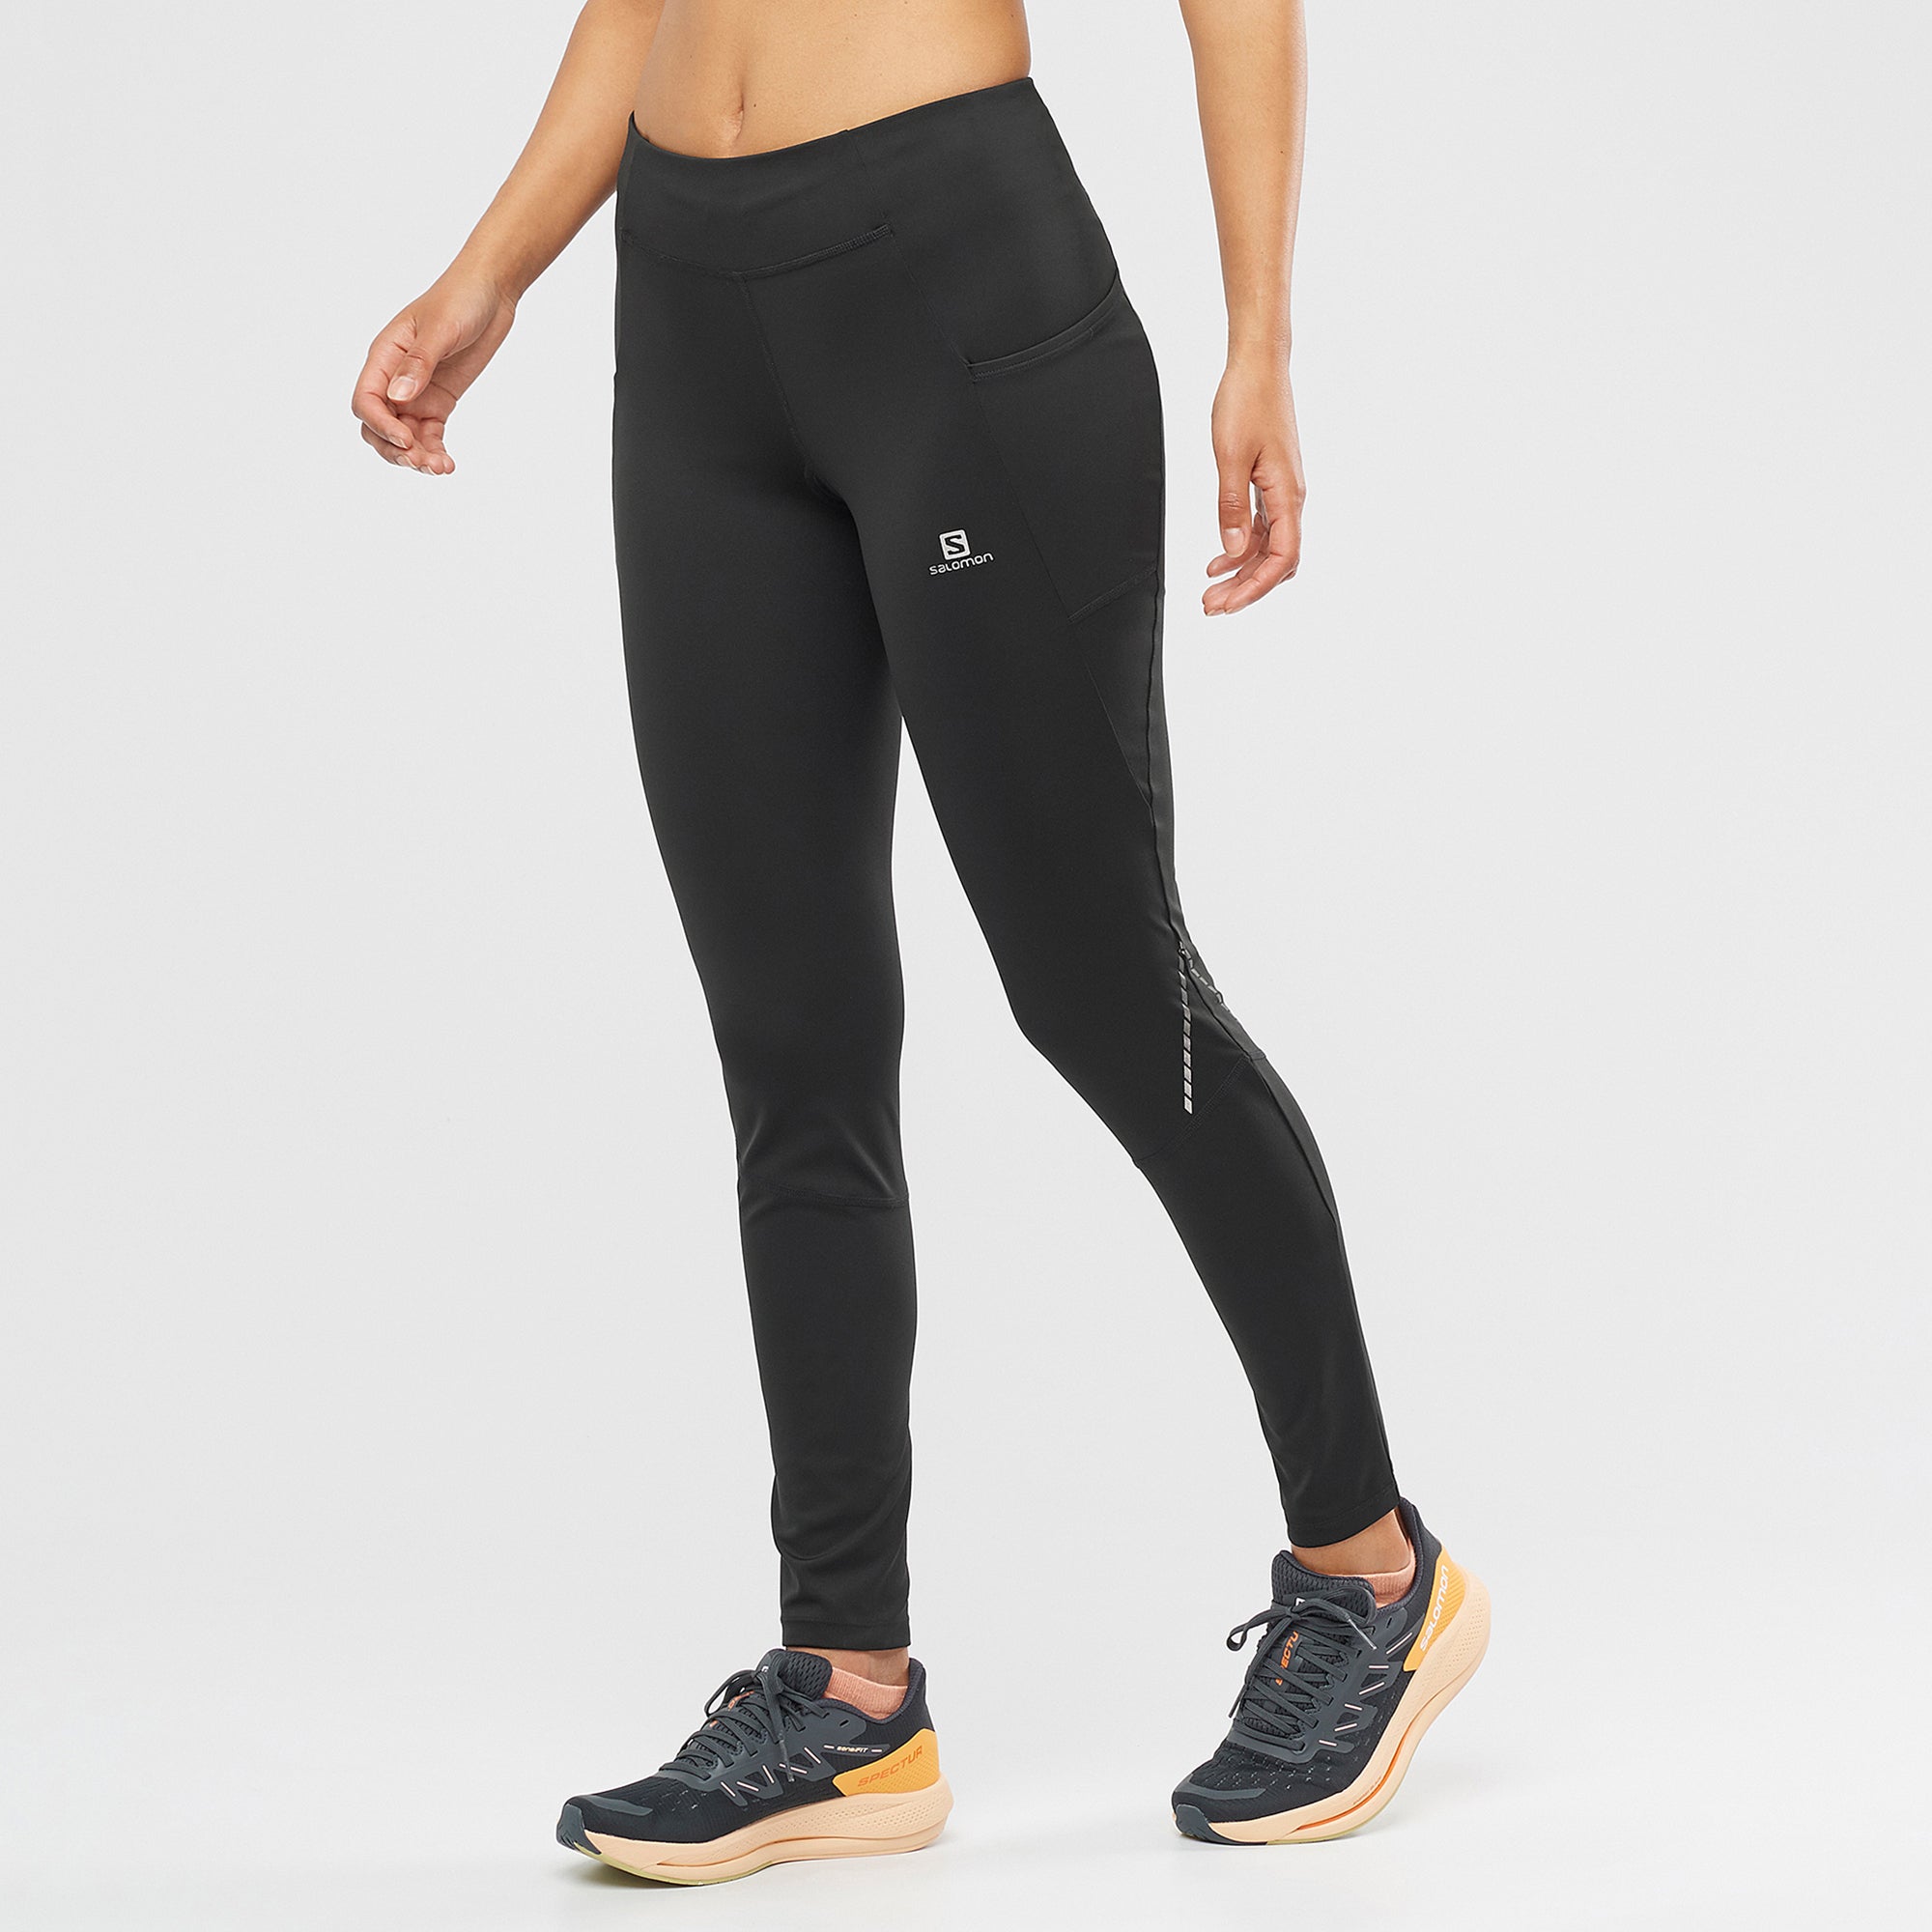 Review of Decathlon Running Apparel or Why Running Tights Should